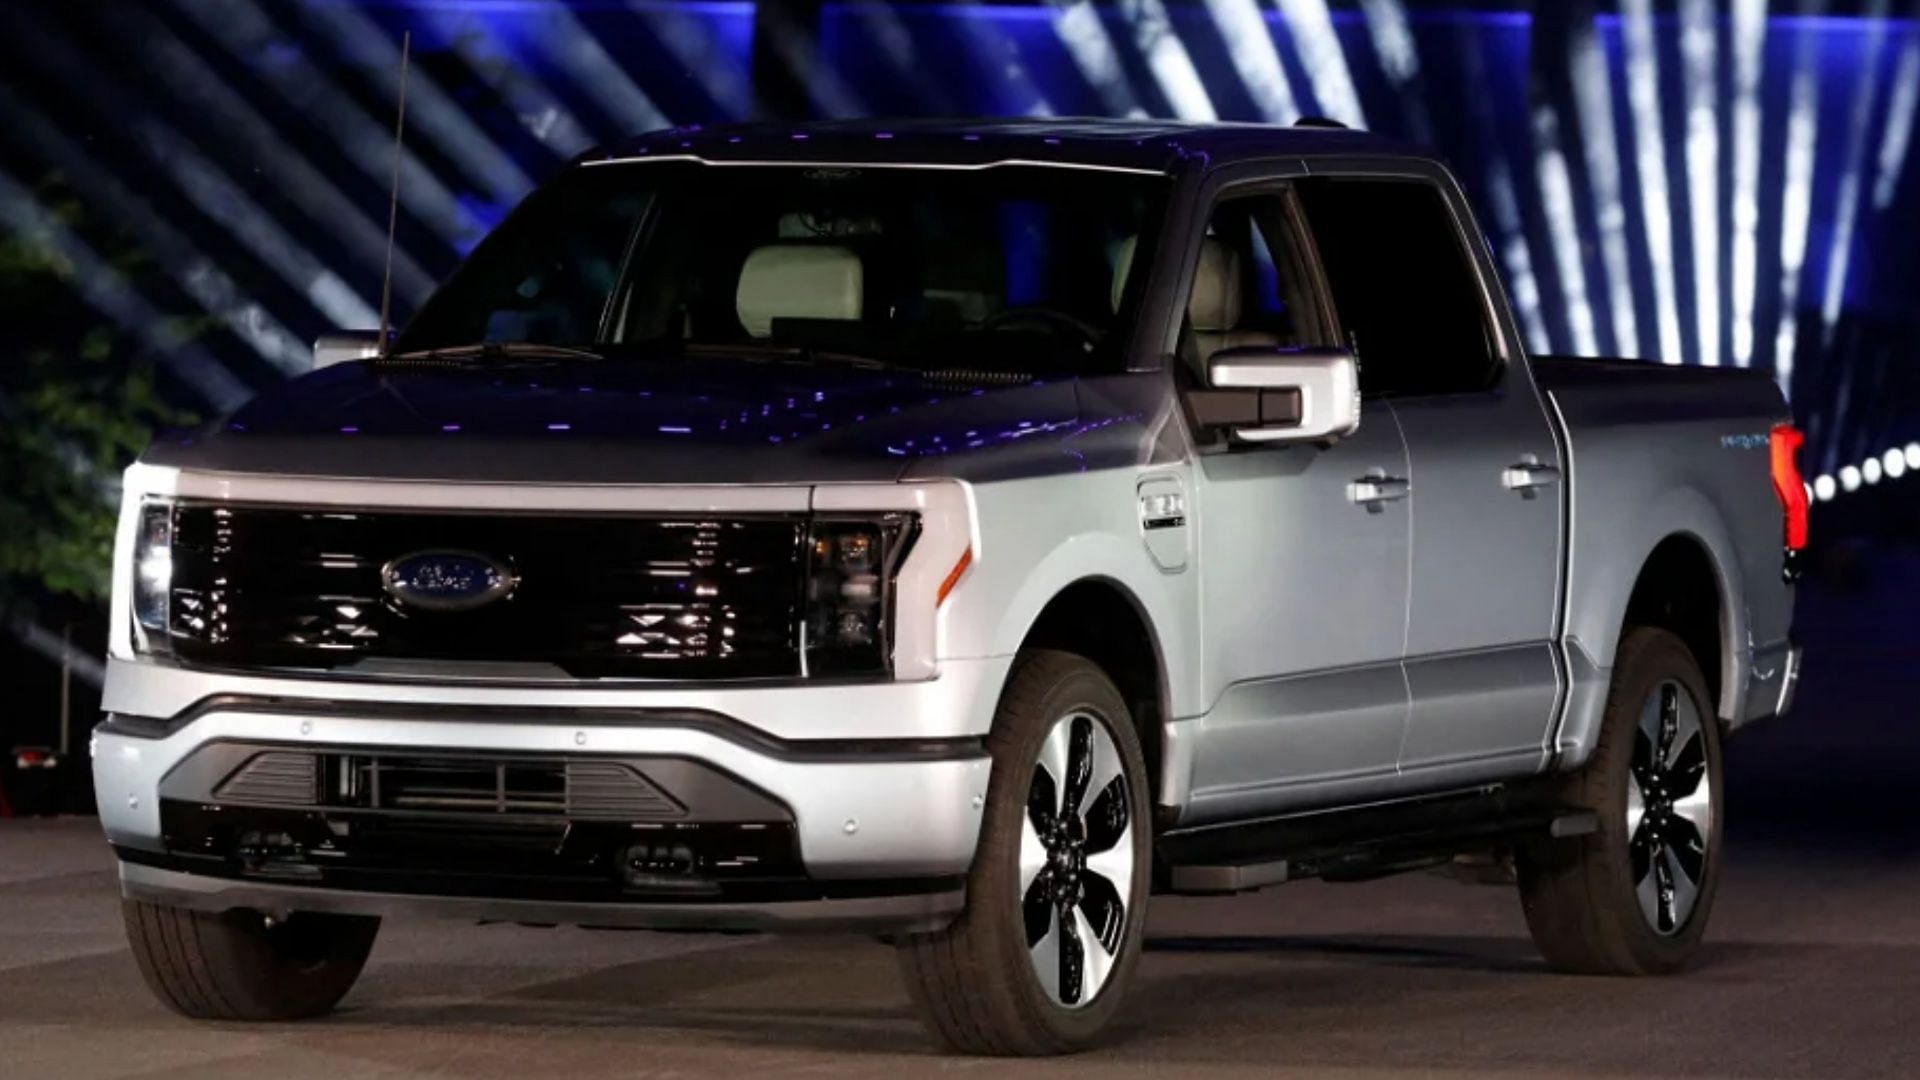 Ford F150 truck recalls Reason, affected model year, and all you need